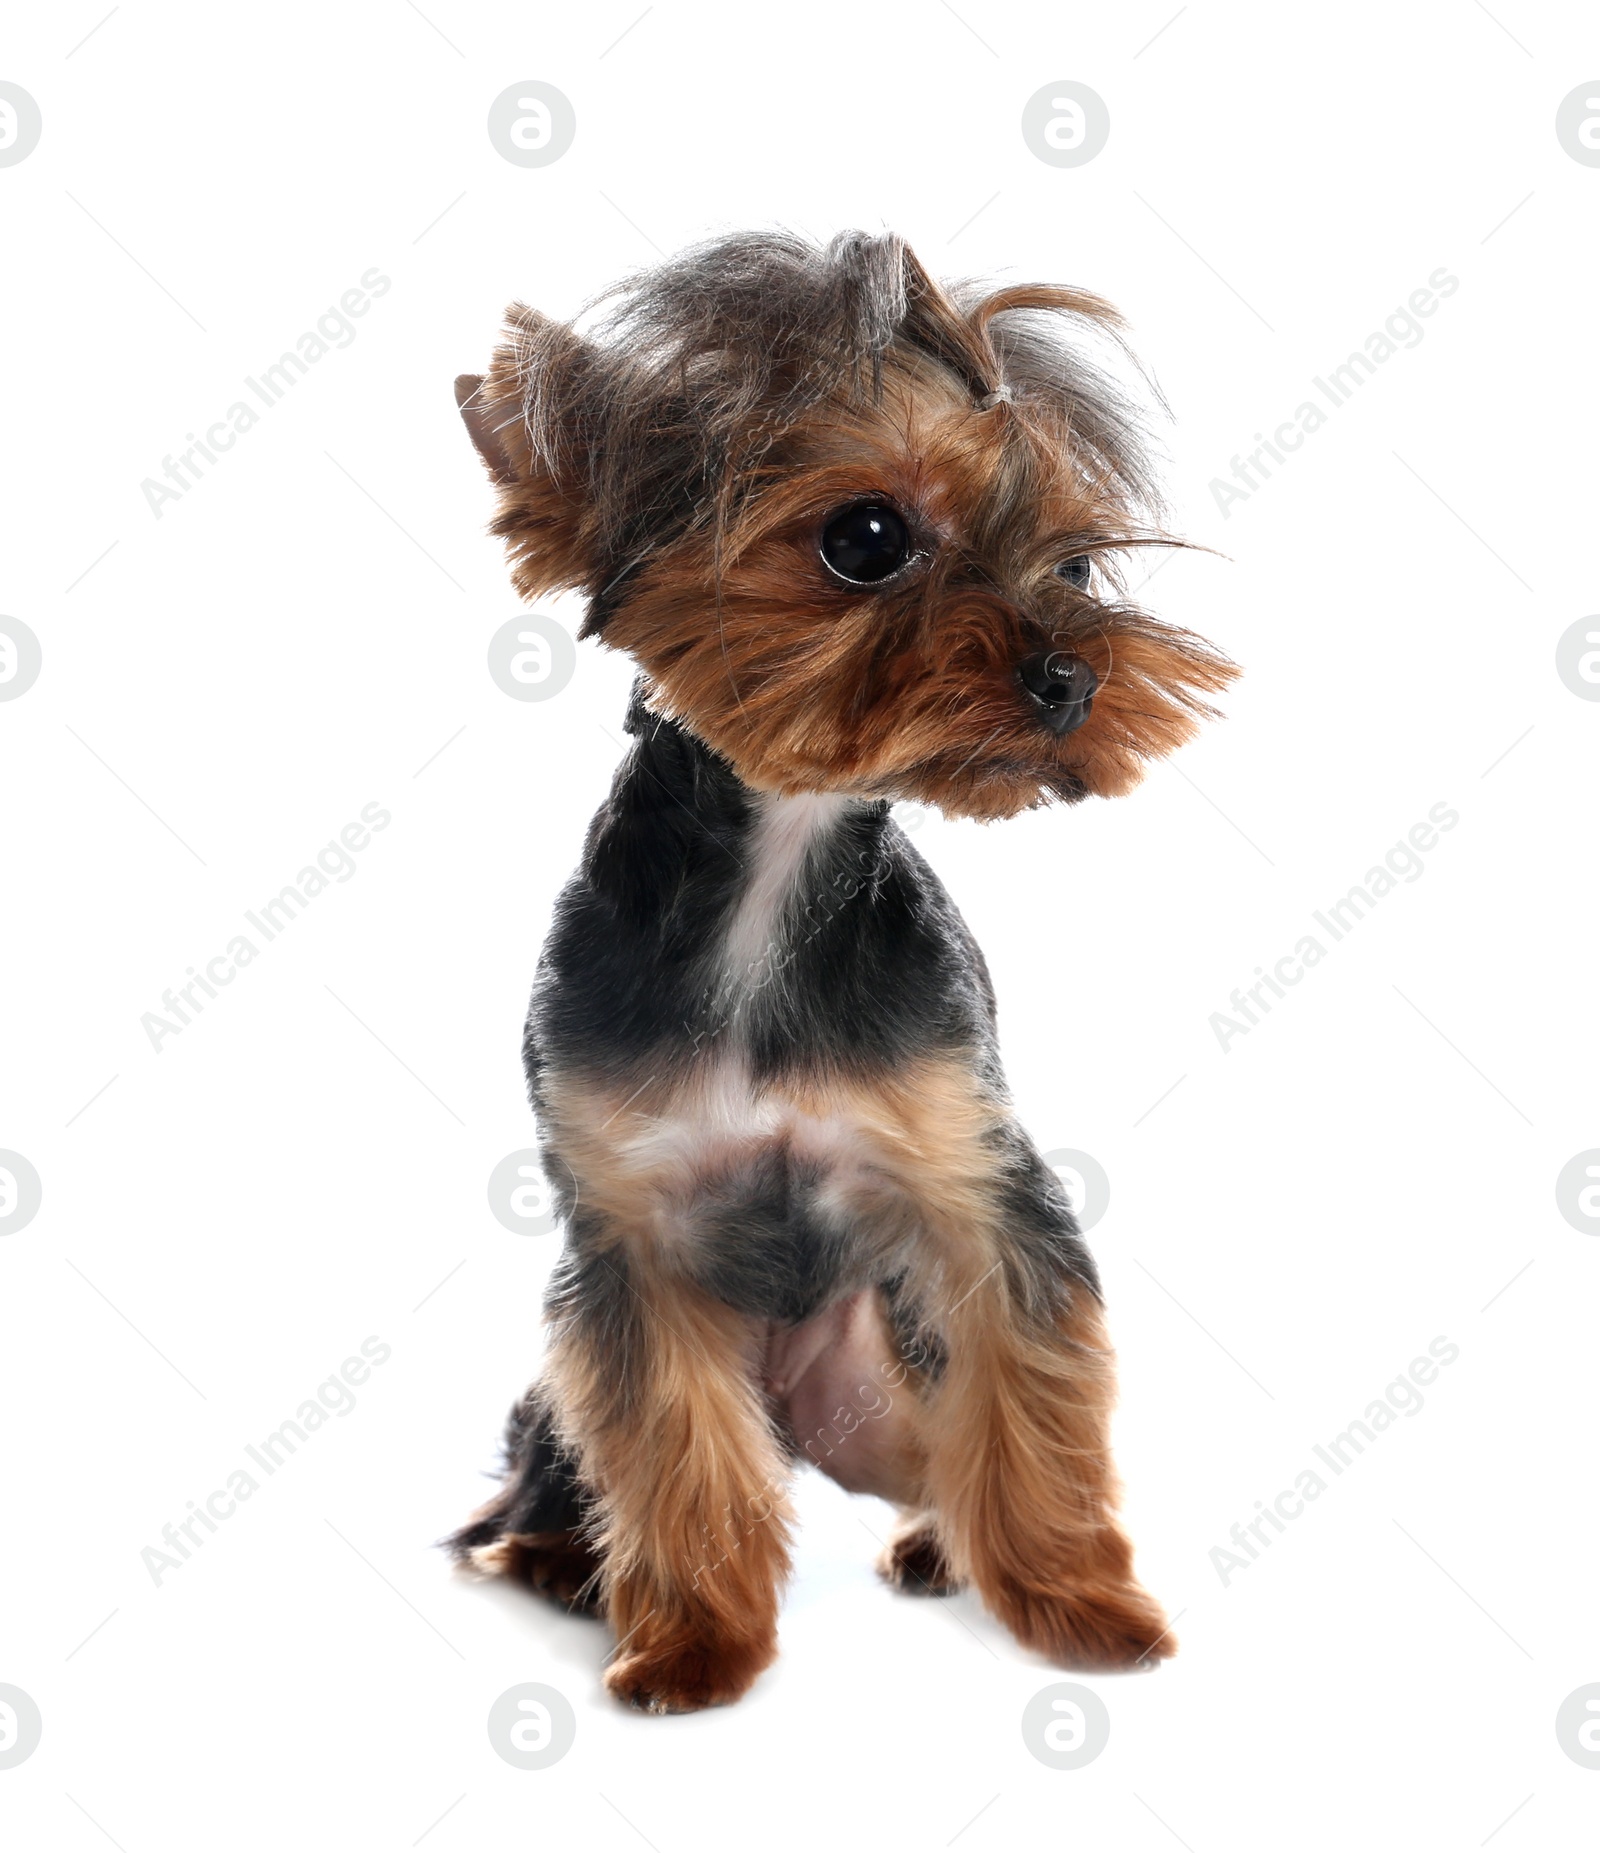 Photo of Cute Yorkshire terrier dog on white background